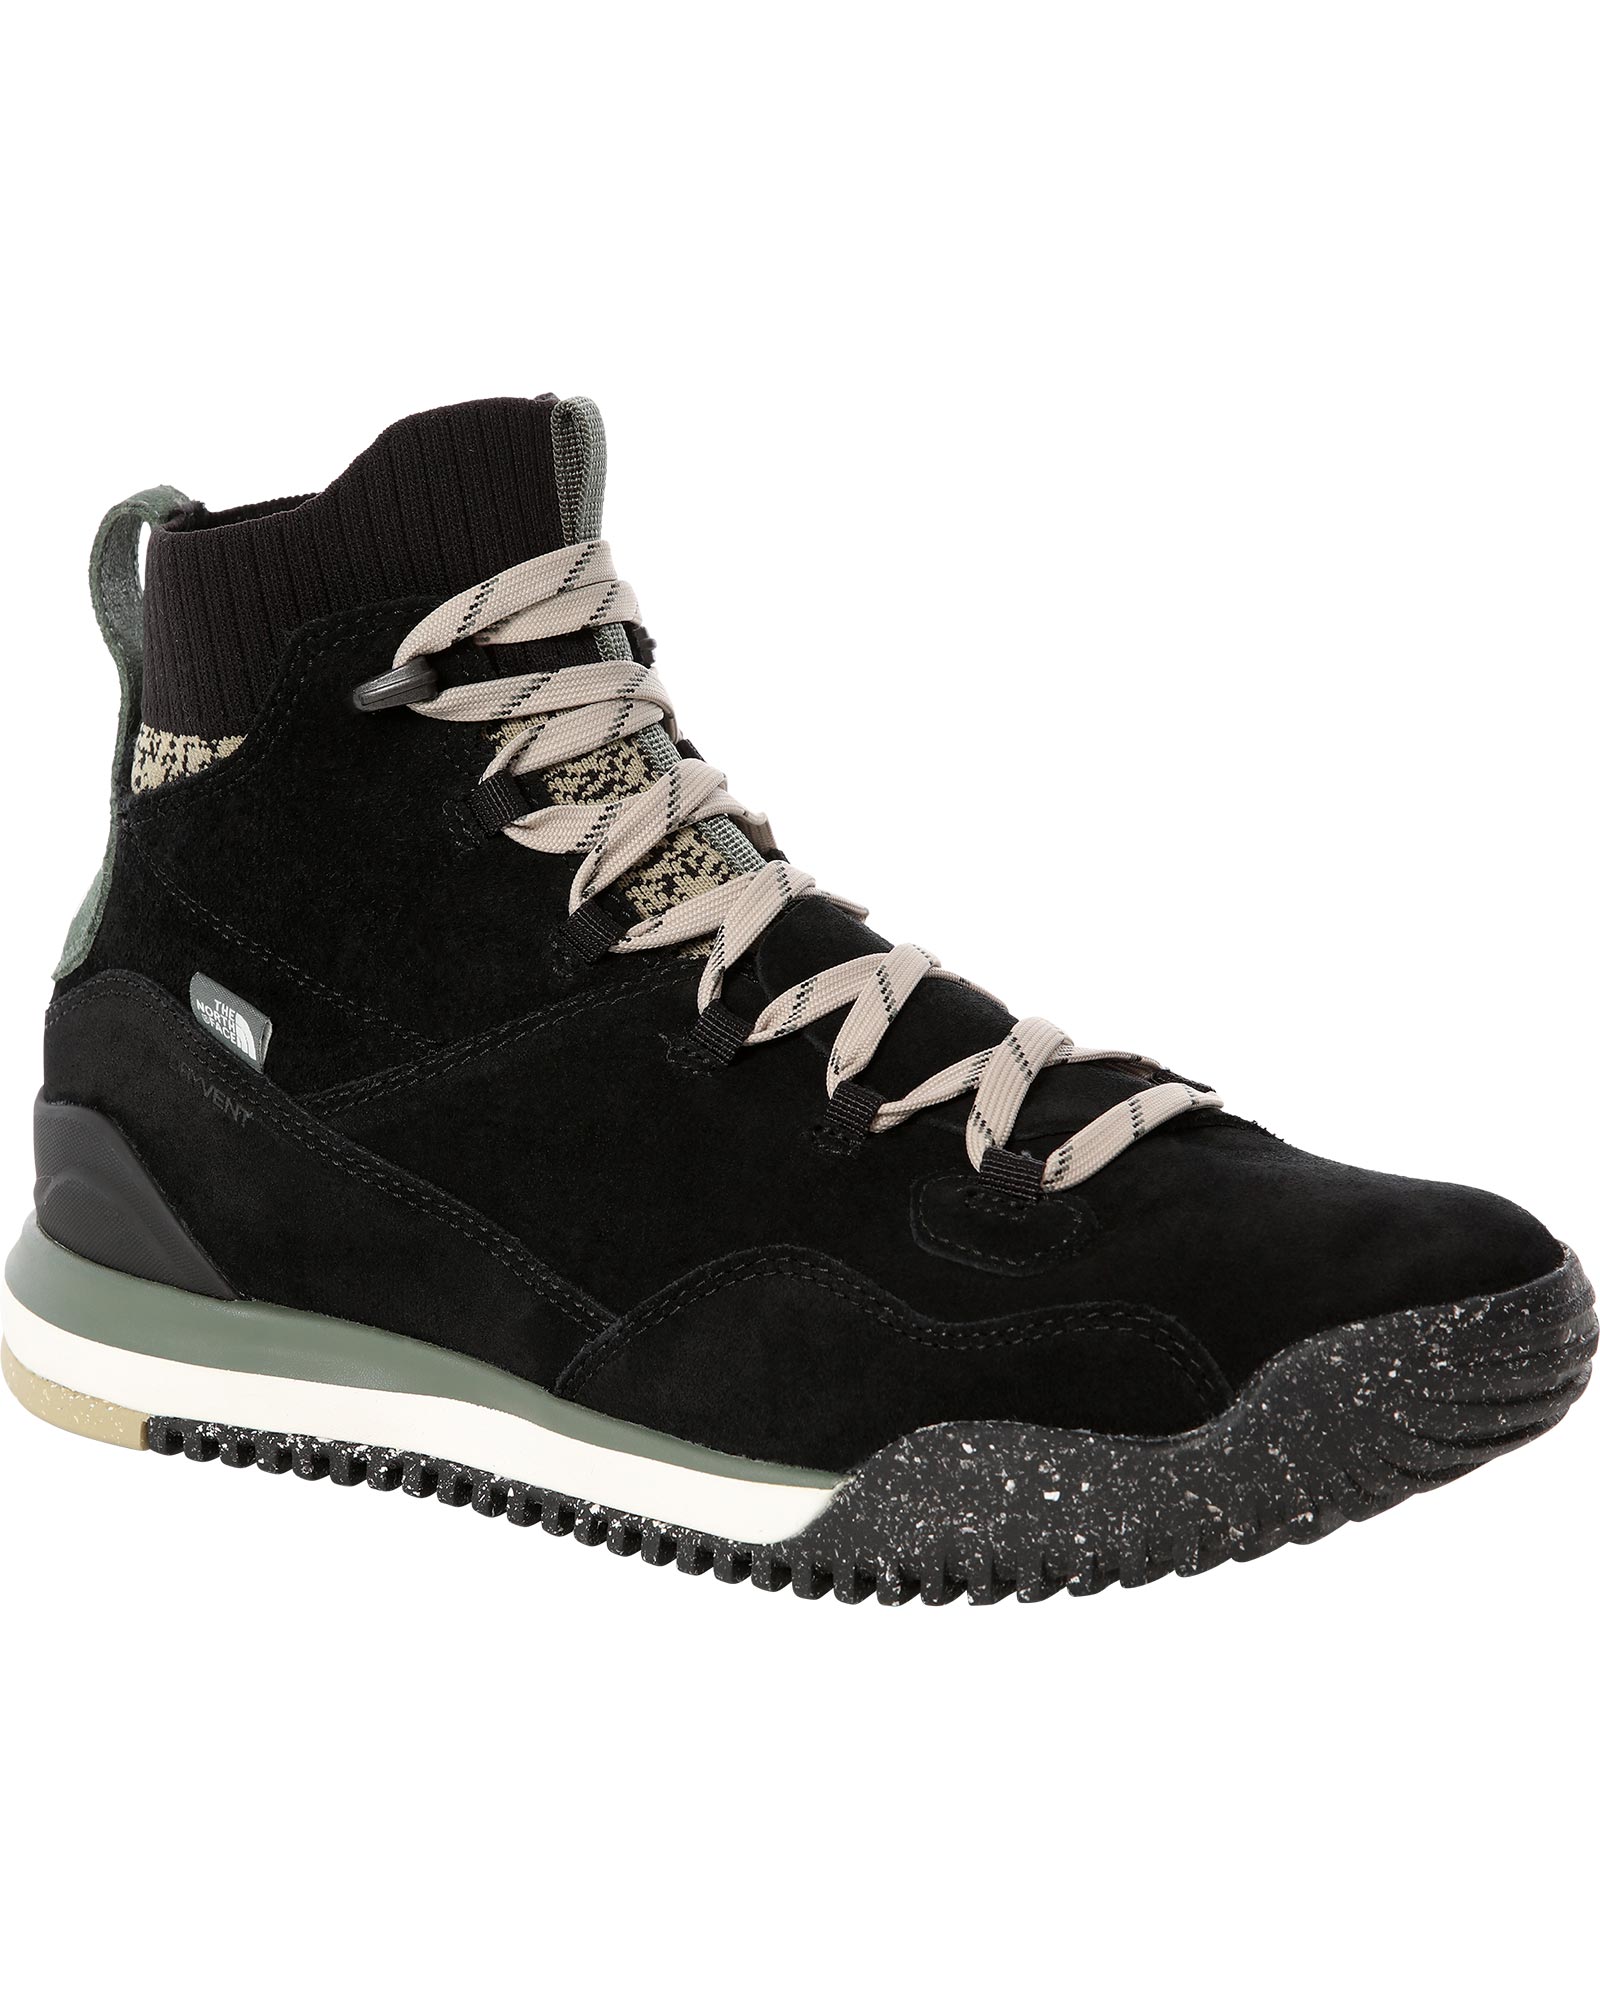 The North Face Back-to-berkeley Iii Sport Mens Waterproof Boots